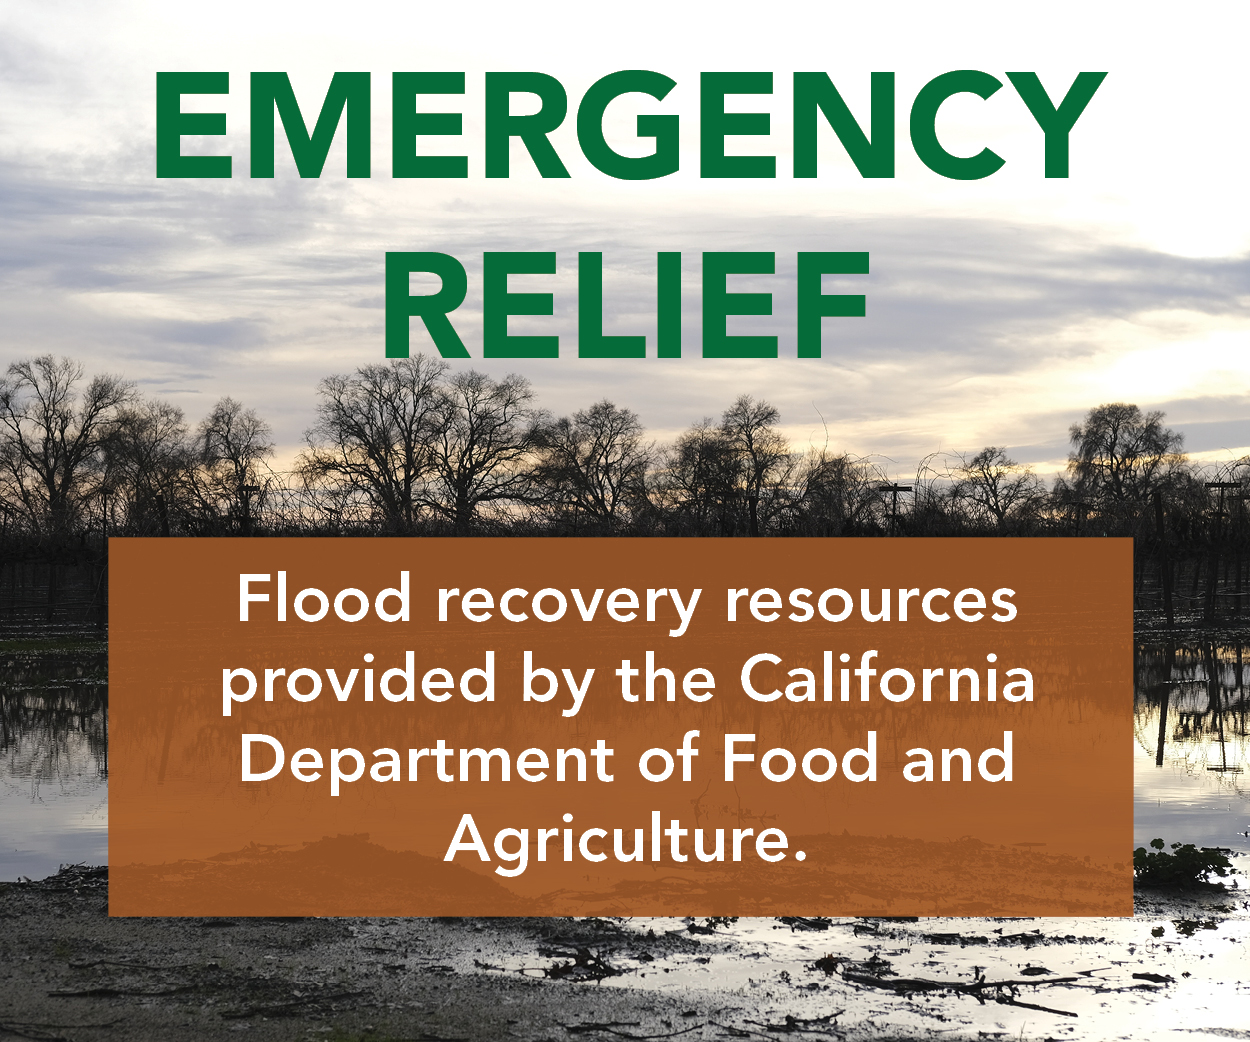 Review available flood recovery resources